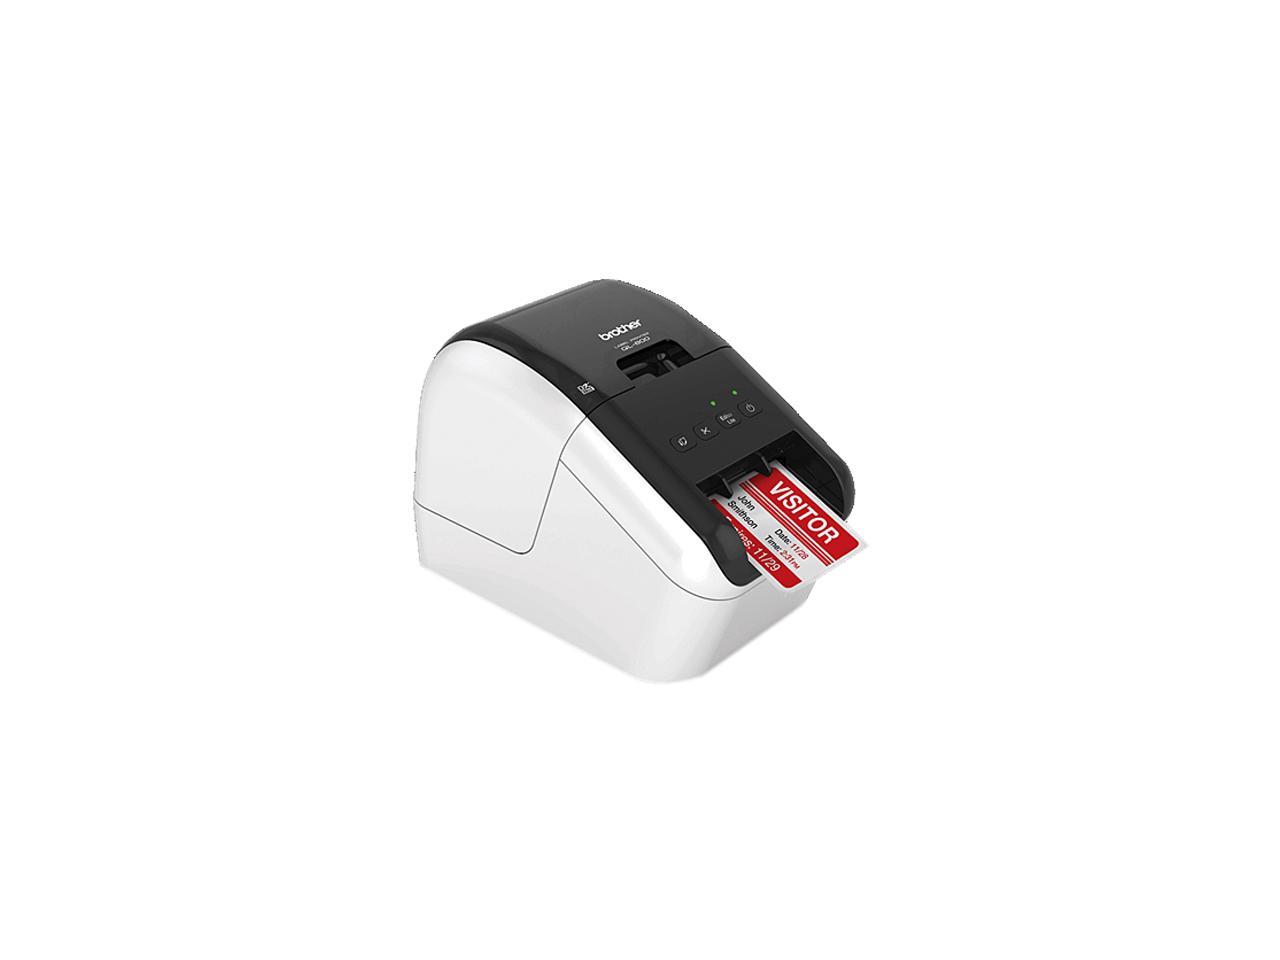 Brother QL-800 High-Speed Professional Label Printer, Black & Red Printing - image 3 of 9